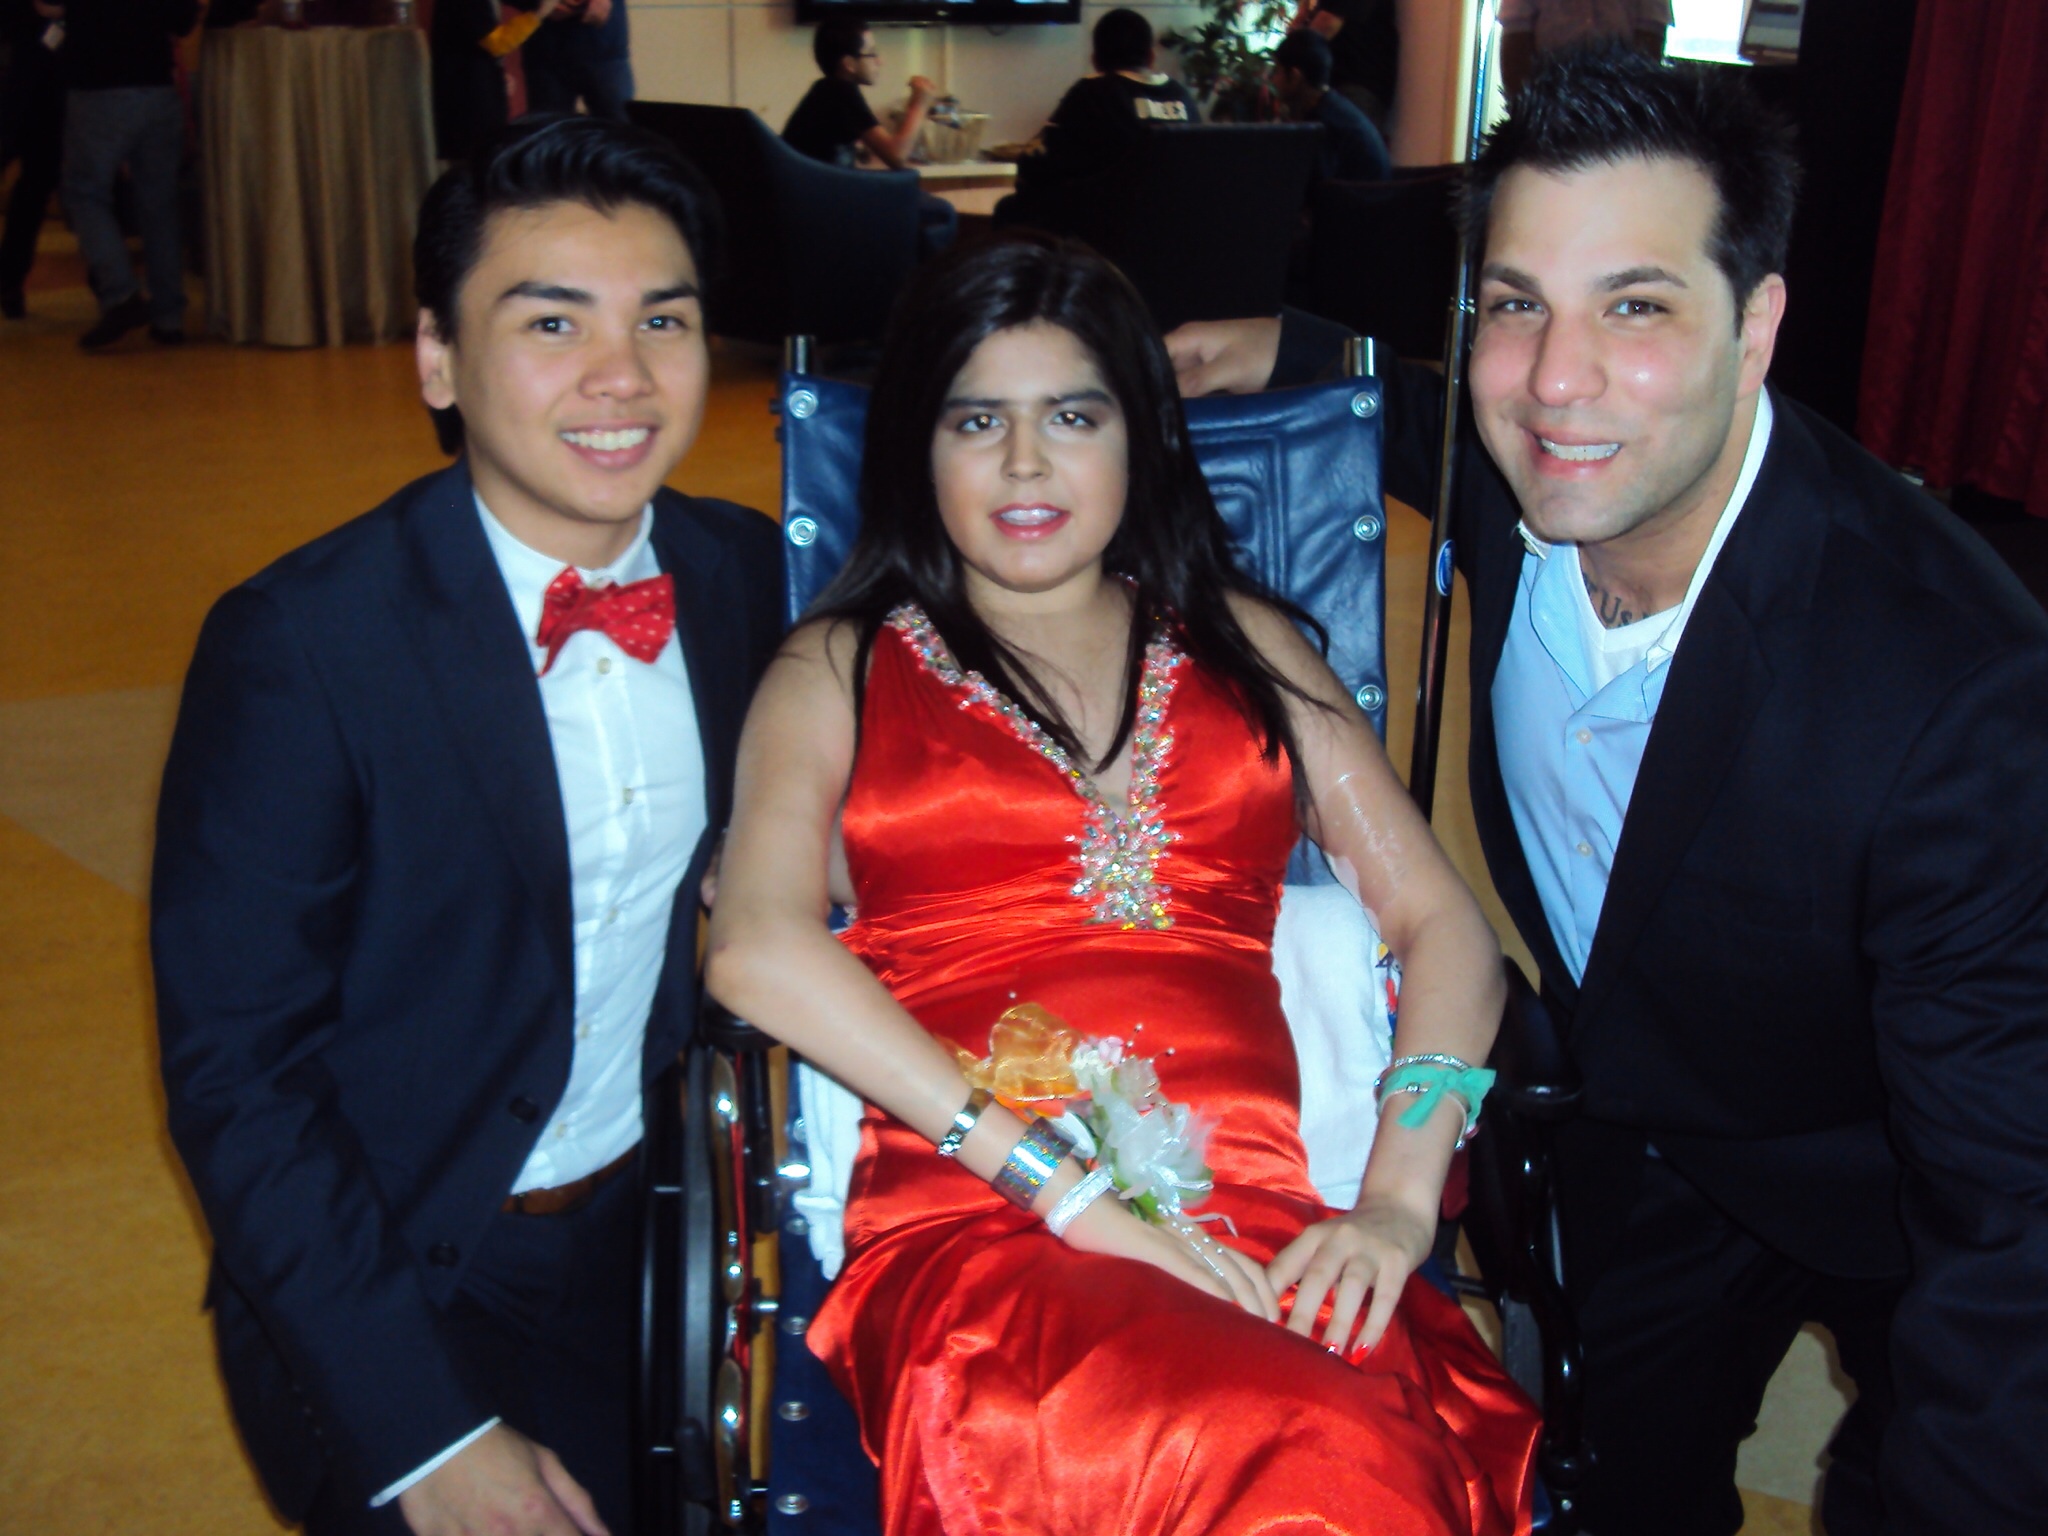 Kevin & Cousin Danny Prom Lurie's 052014.jpg